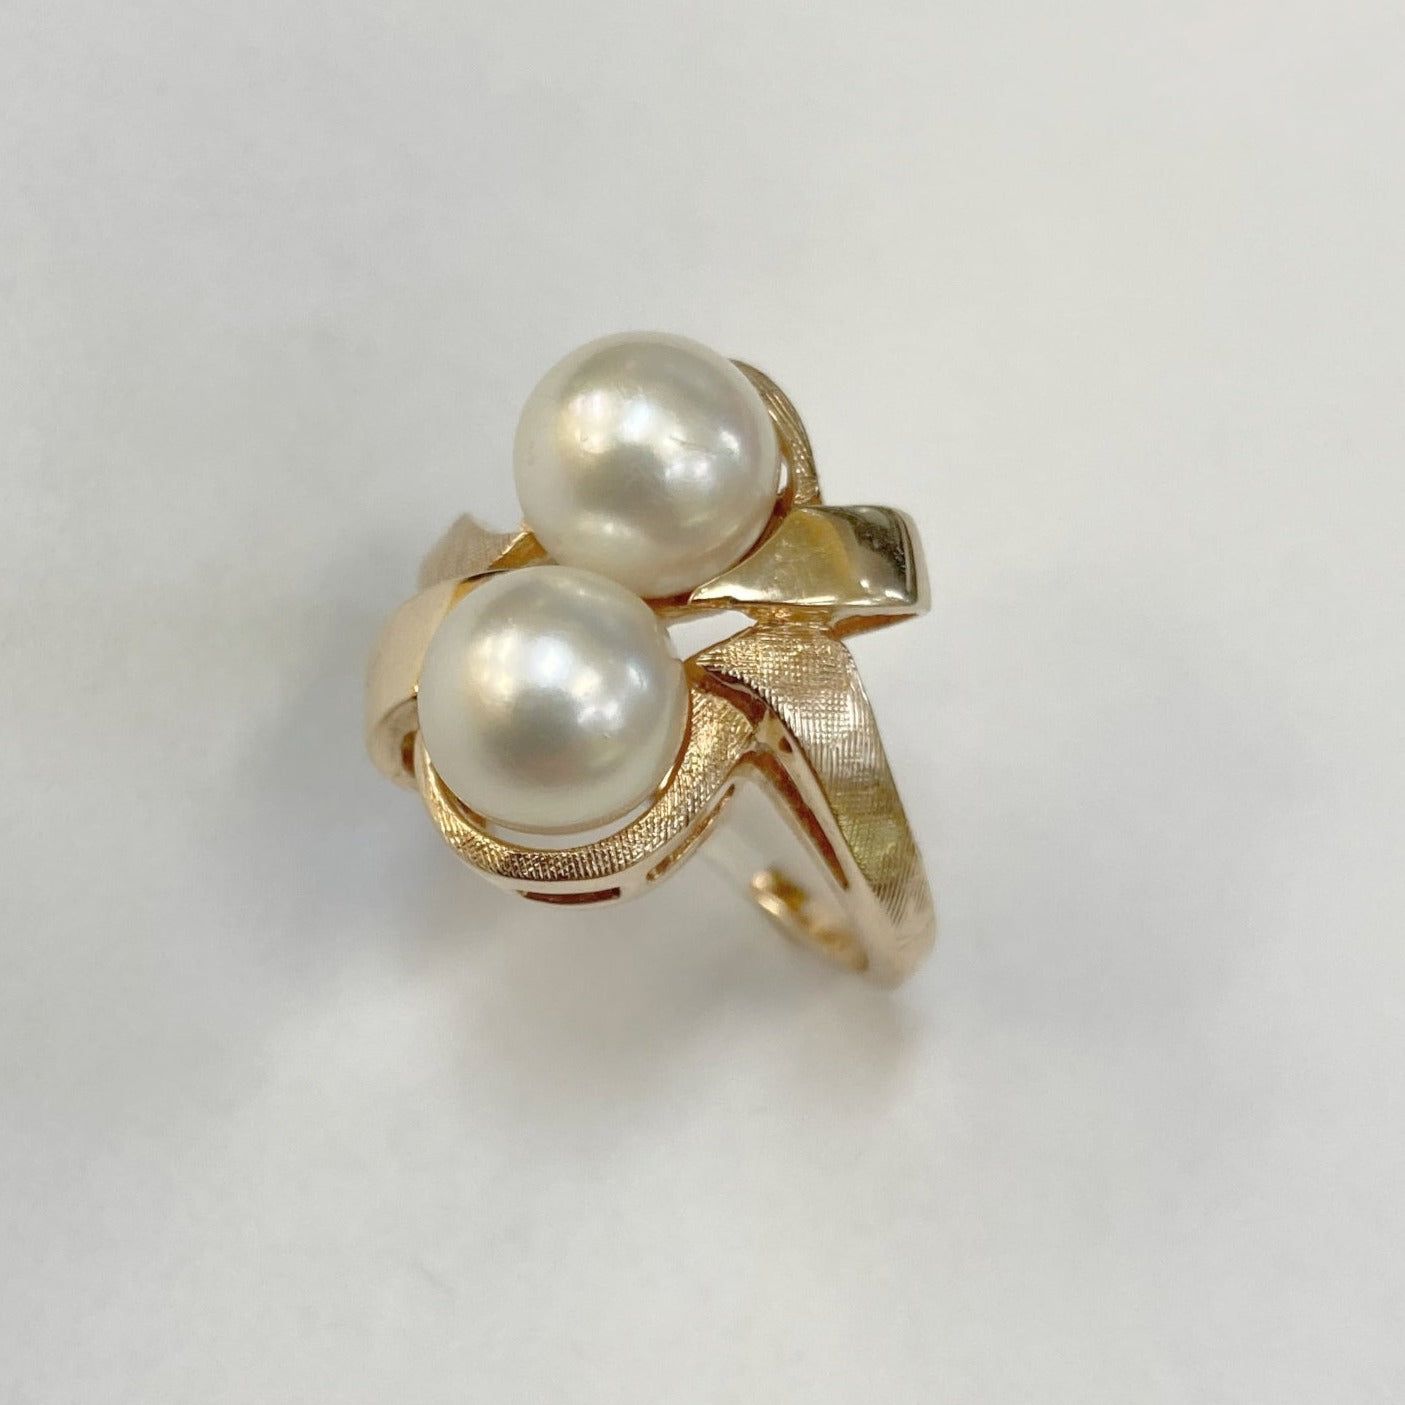 14k Two Pearl Ring